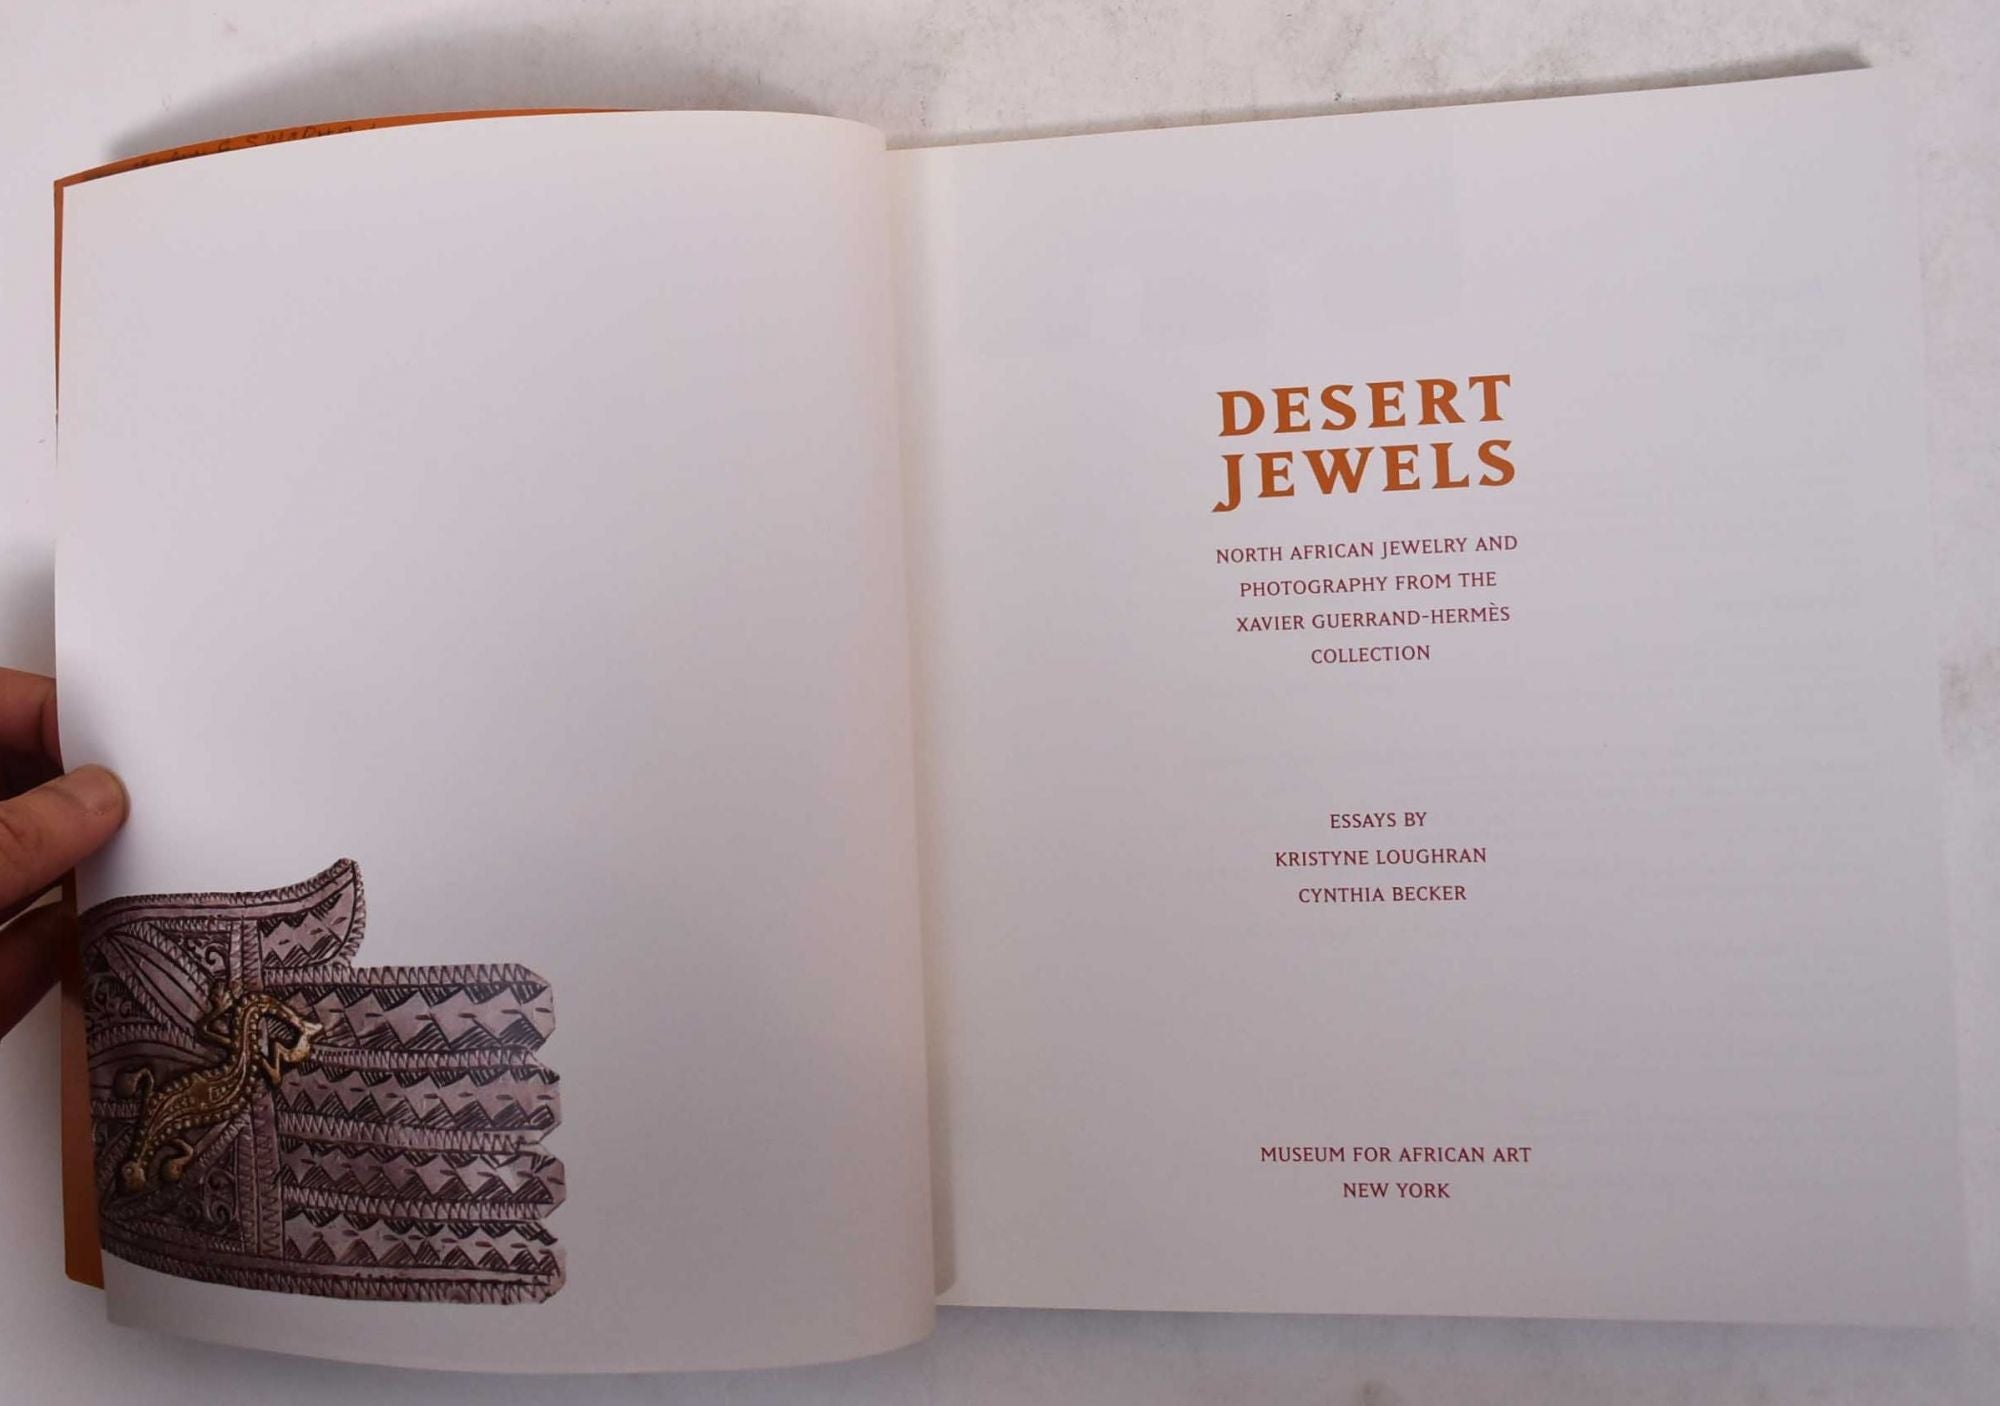 Desert Jewels: North African Jewelry and Photography from the 